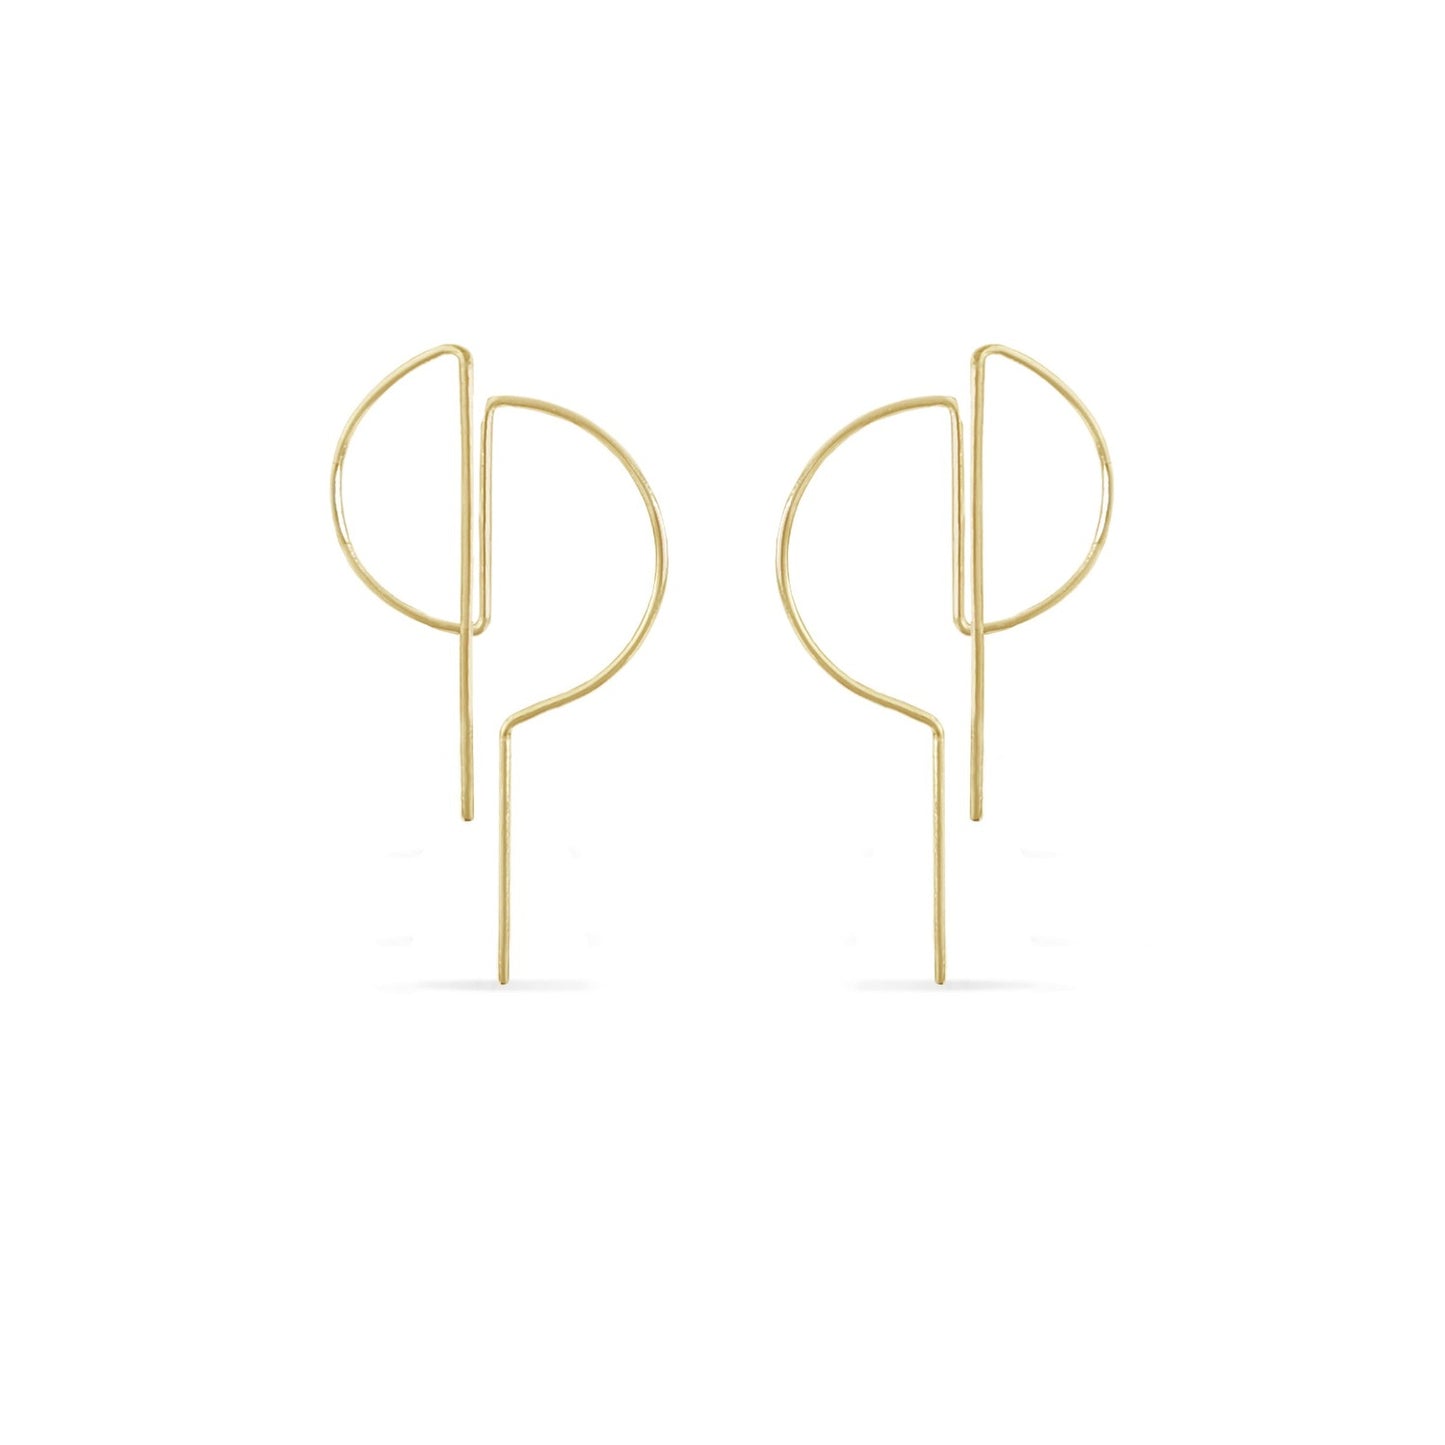 A pair of double D shaped micro hoop earring in 14K yellow gold